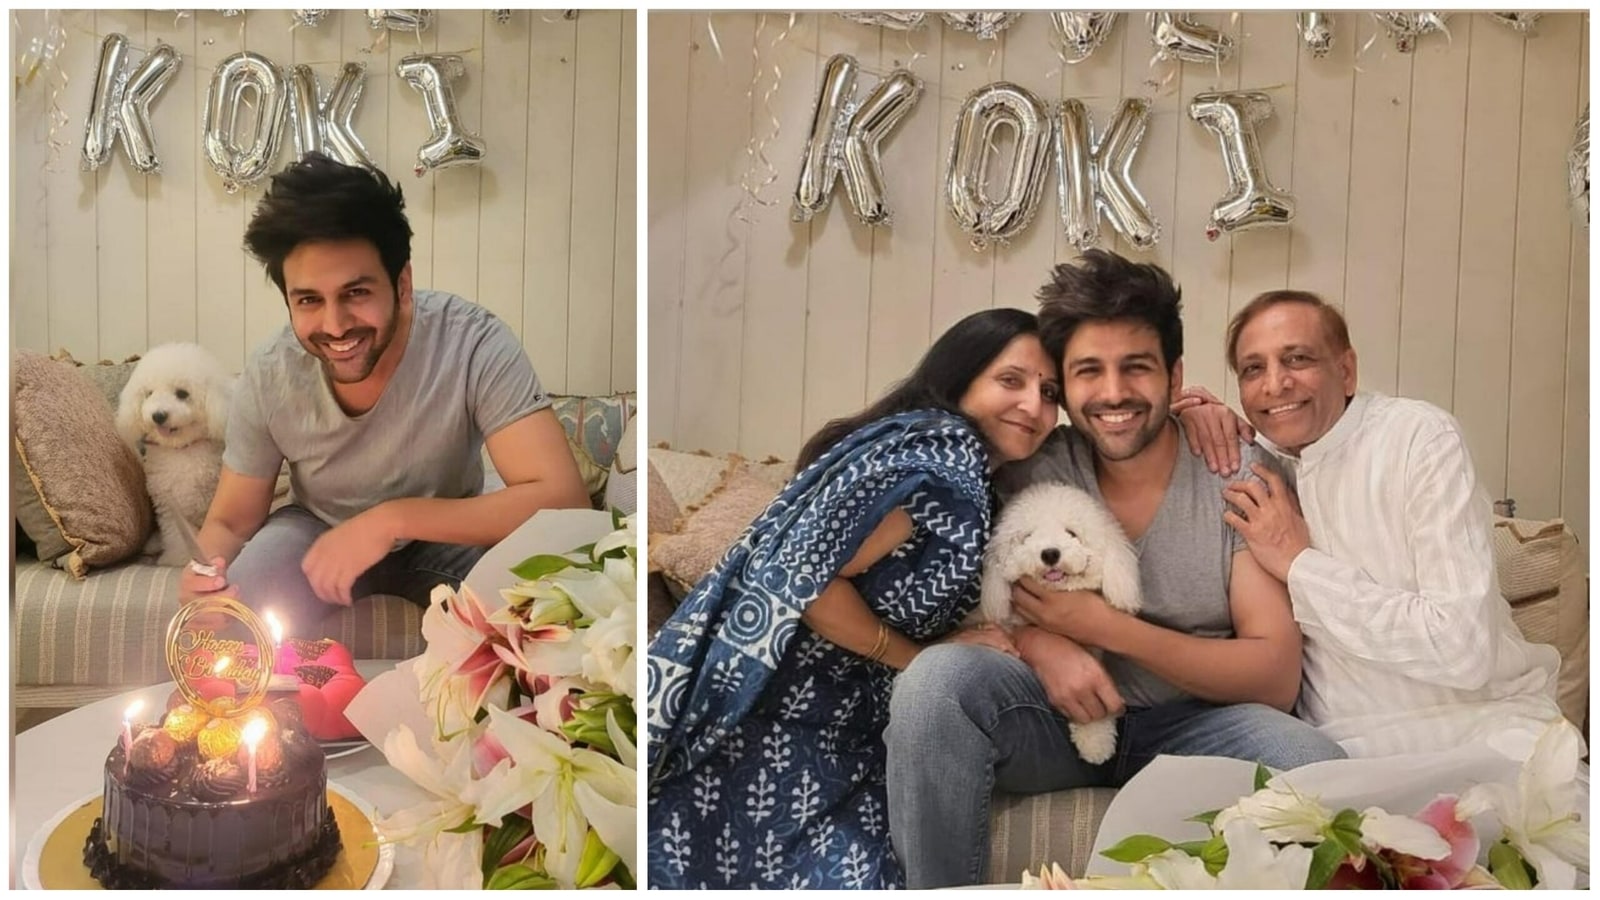 Kartik Aaryan gets birthday surprise from family, Kriti Sanon says ‘I have the best gift for you’. See pics